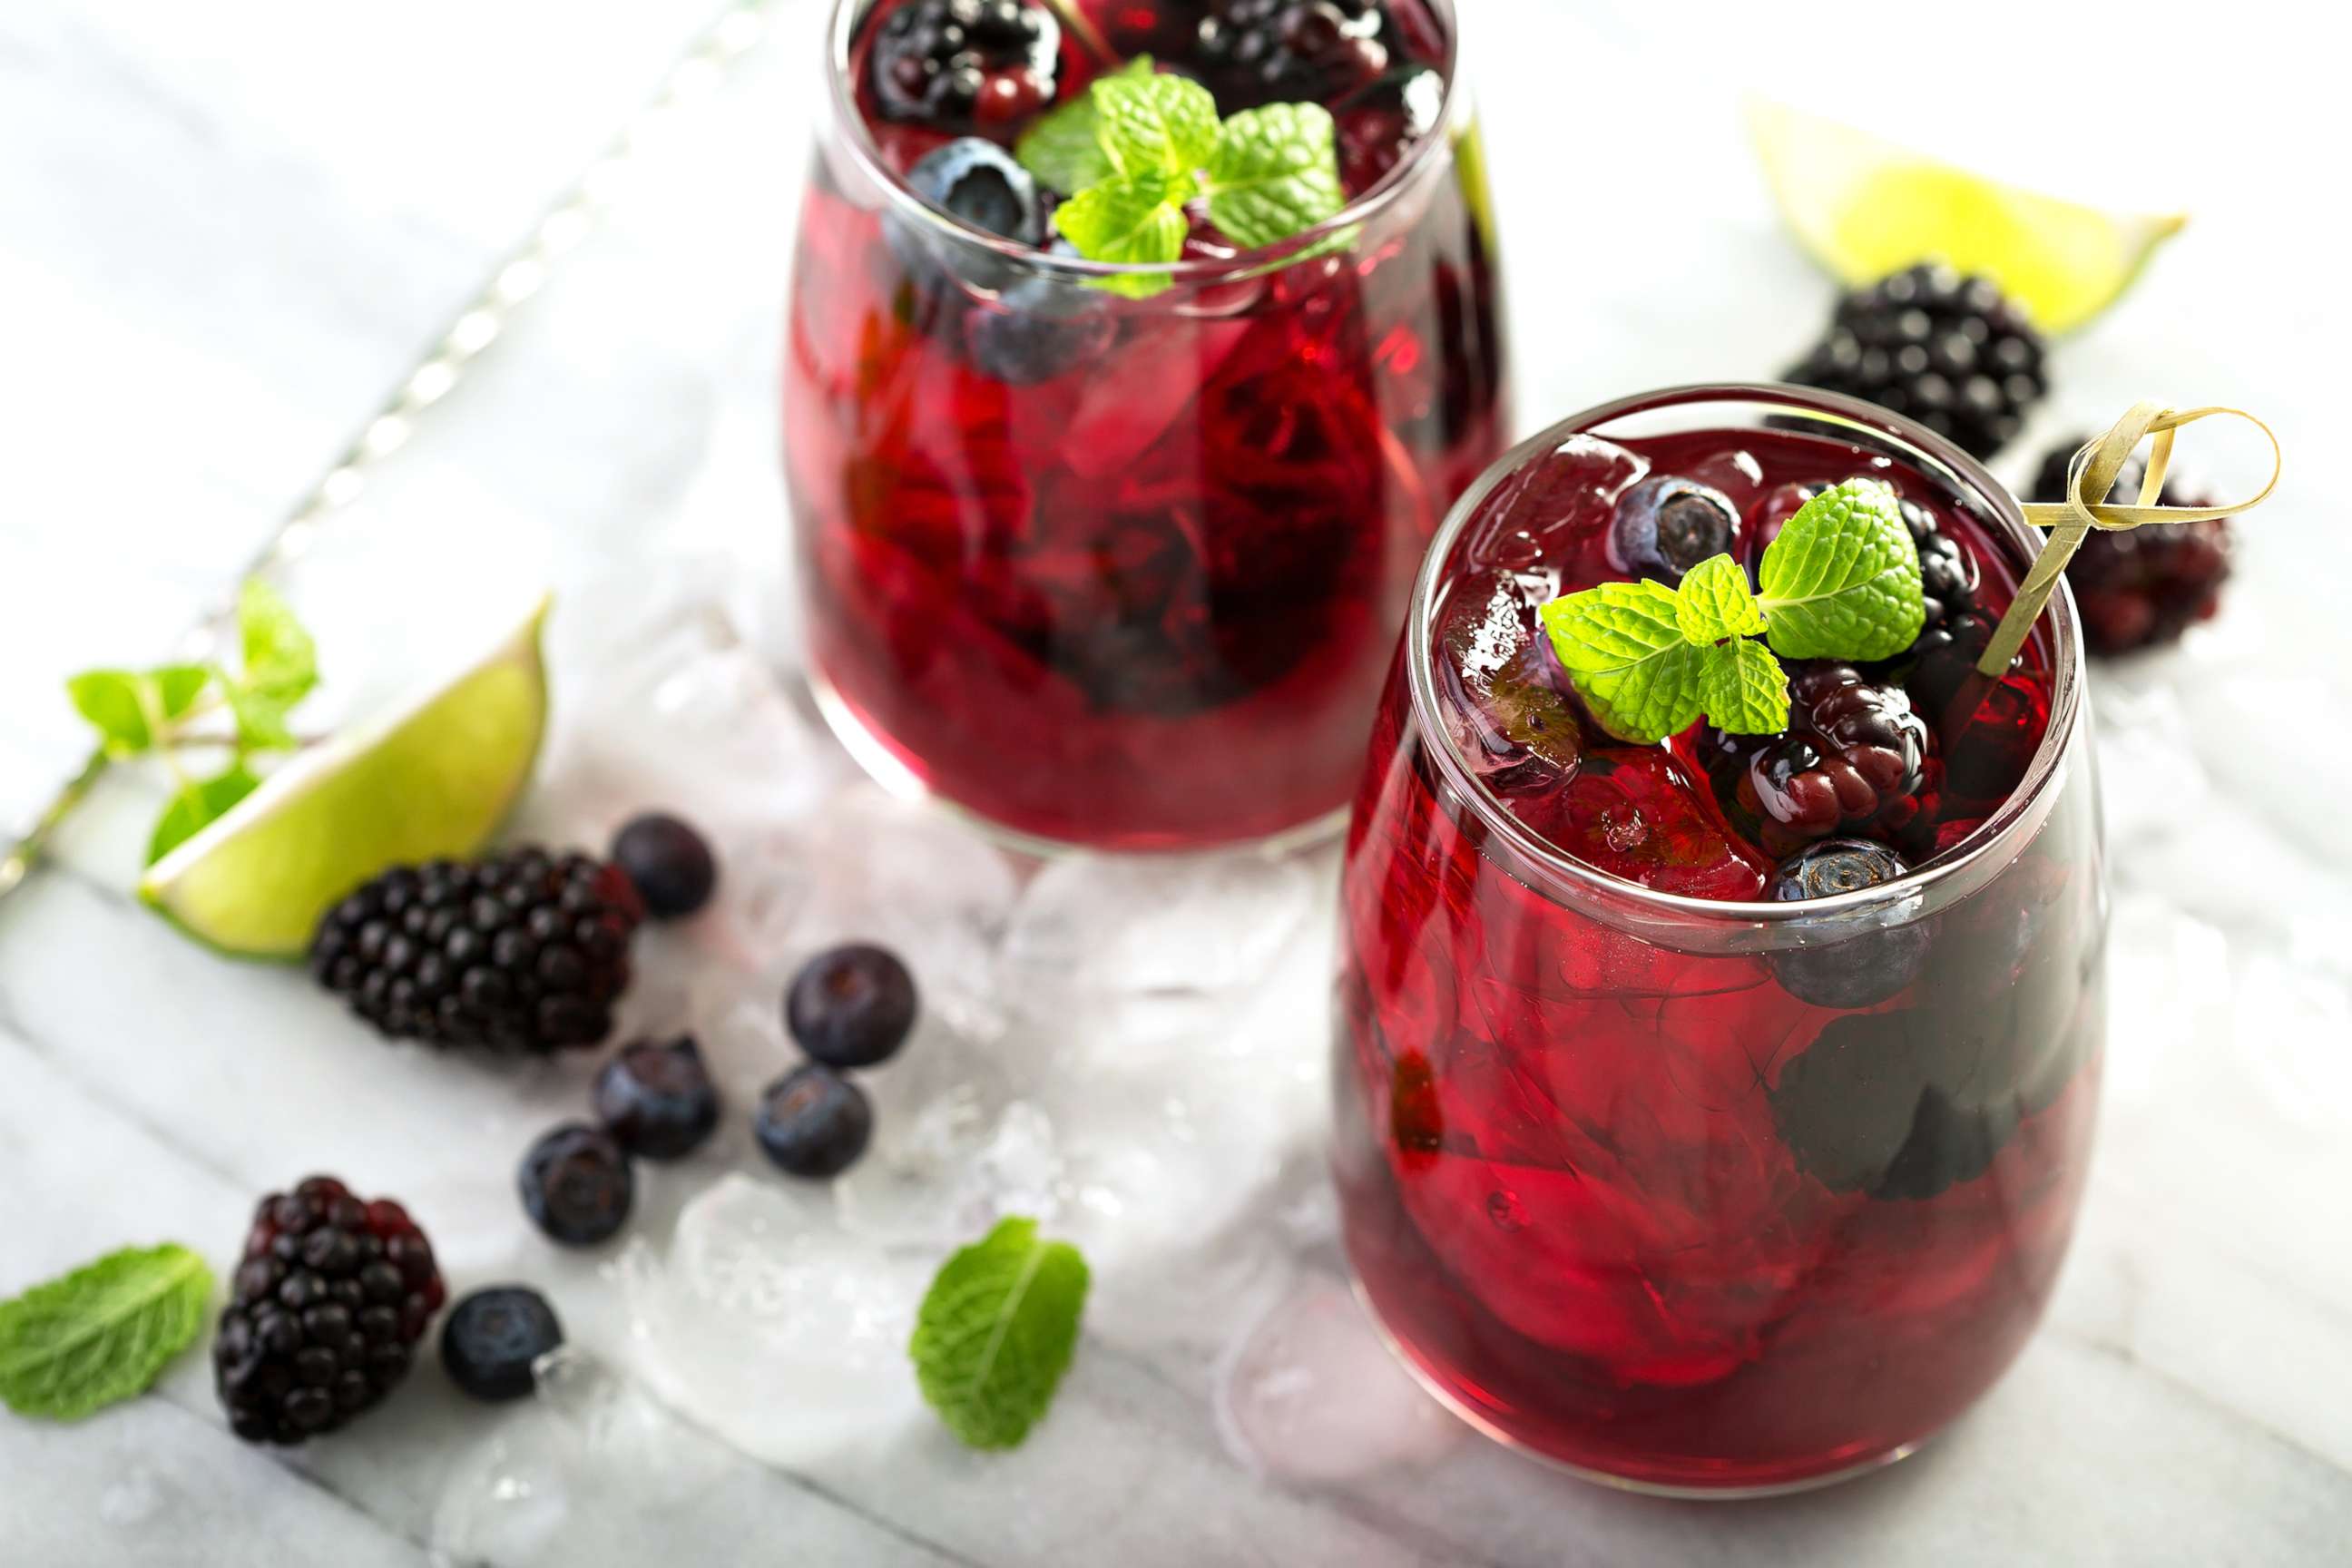 PHOTO: A muddled berry iced tea mocktail is photographed.